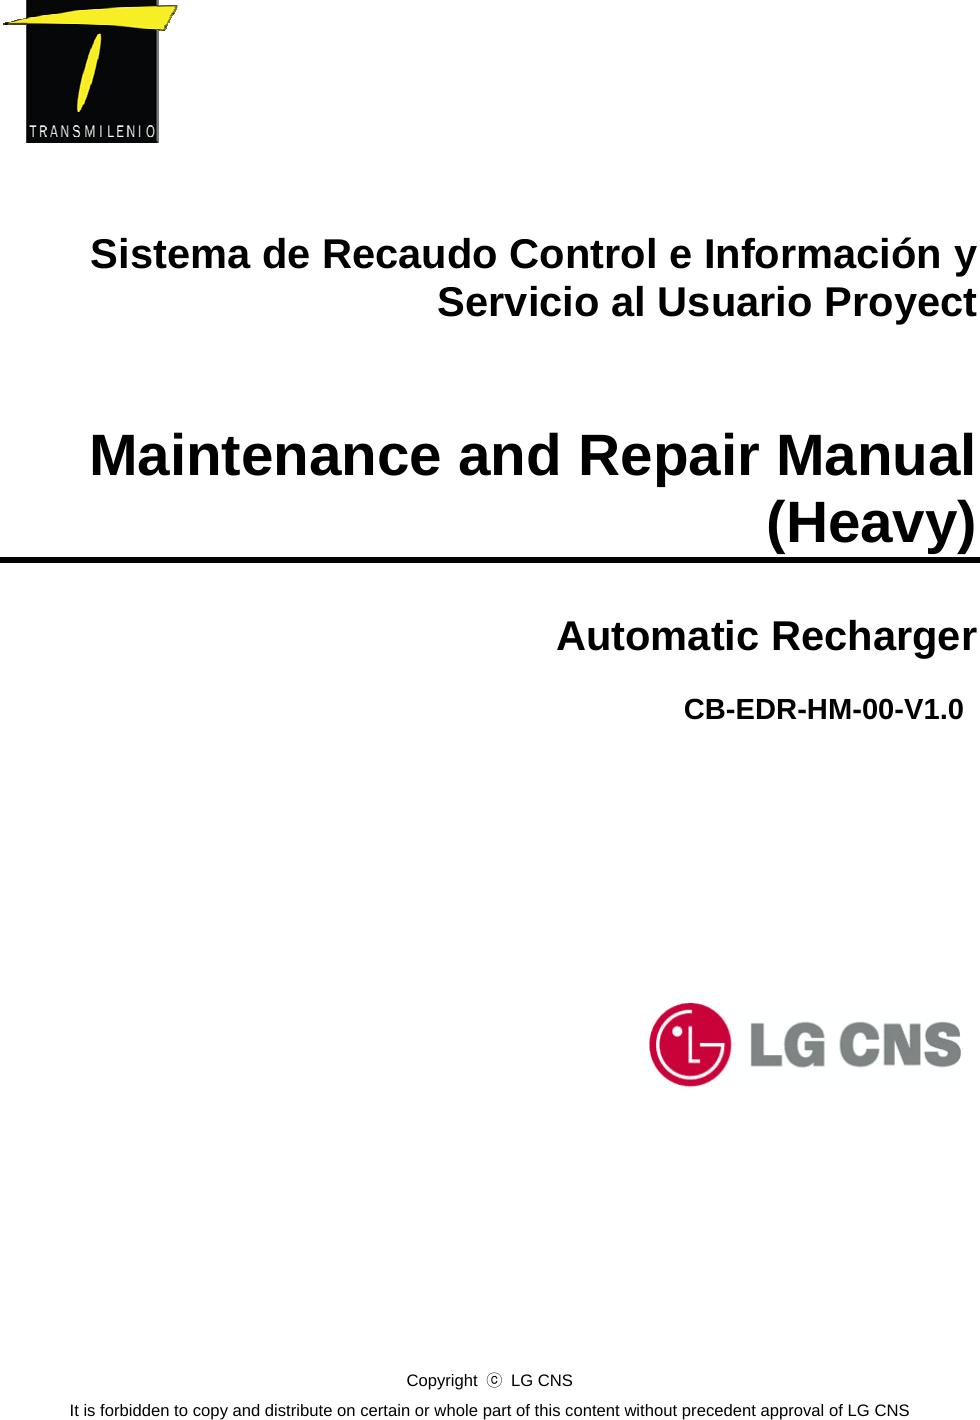       Sistema de Recaudo Control e Información y Servicio al Usuario Proyect   Maintenance and Repair Manual (Heavy)  Automatic Recharger            CB-EDR-HM-00-V1.0 Copyright  ⓒ LG CNS It is forbidden to copy and distribute on certain or whole part of this content without precedent approval of LG CNS  